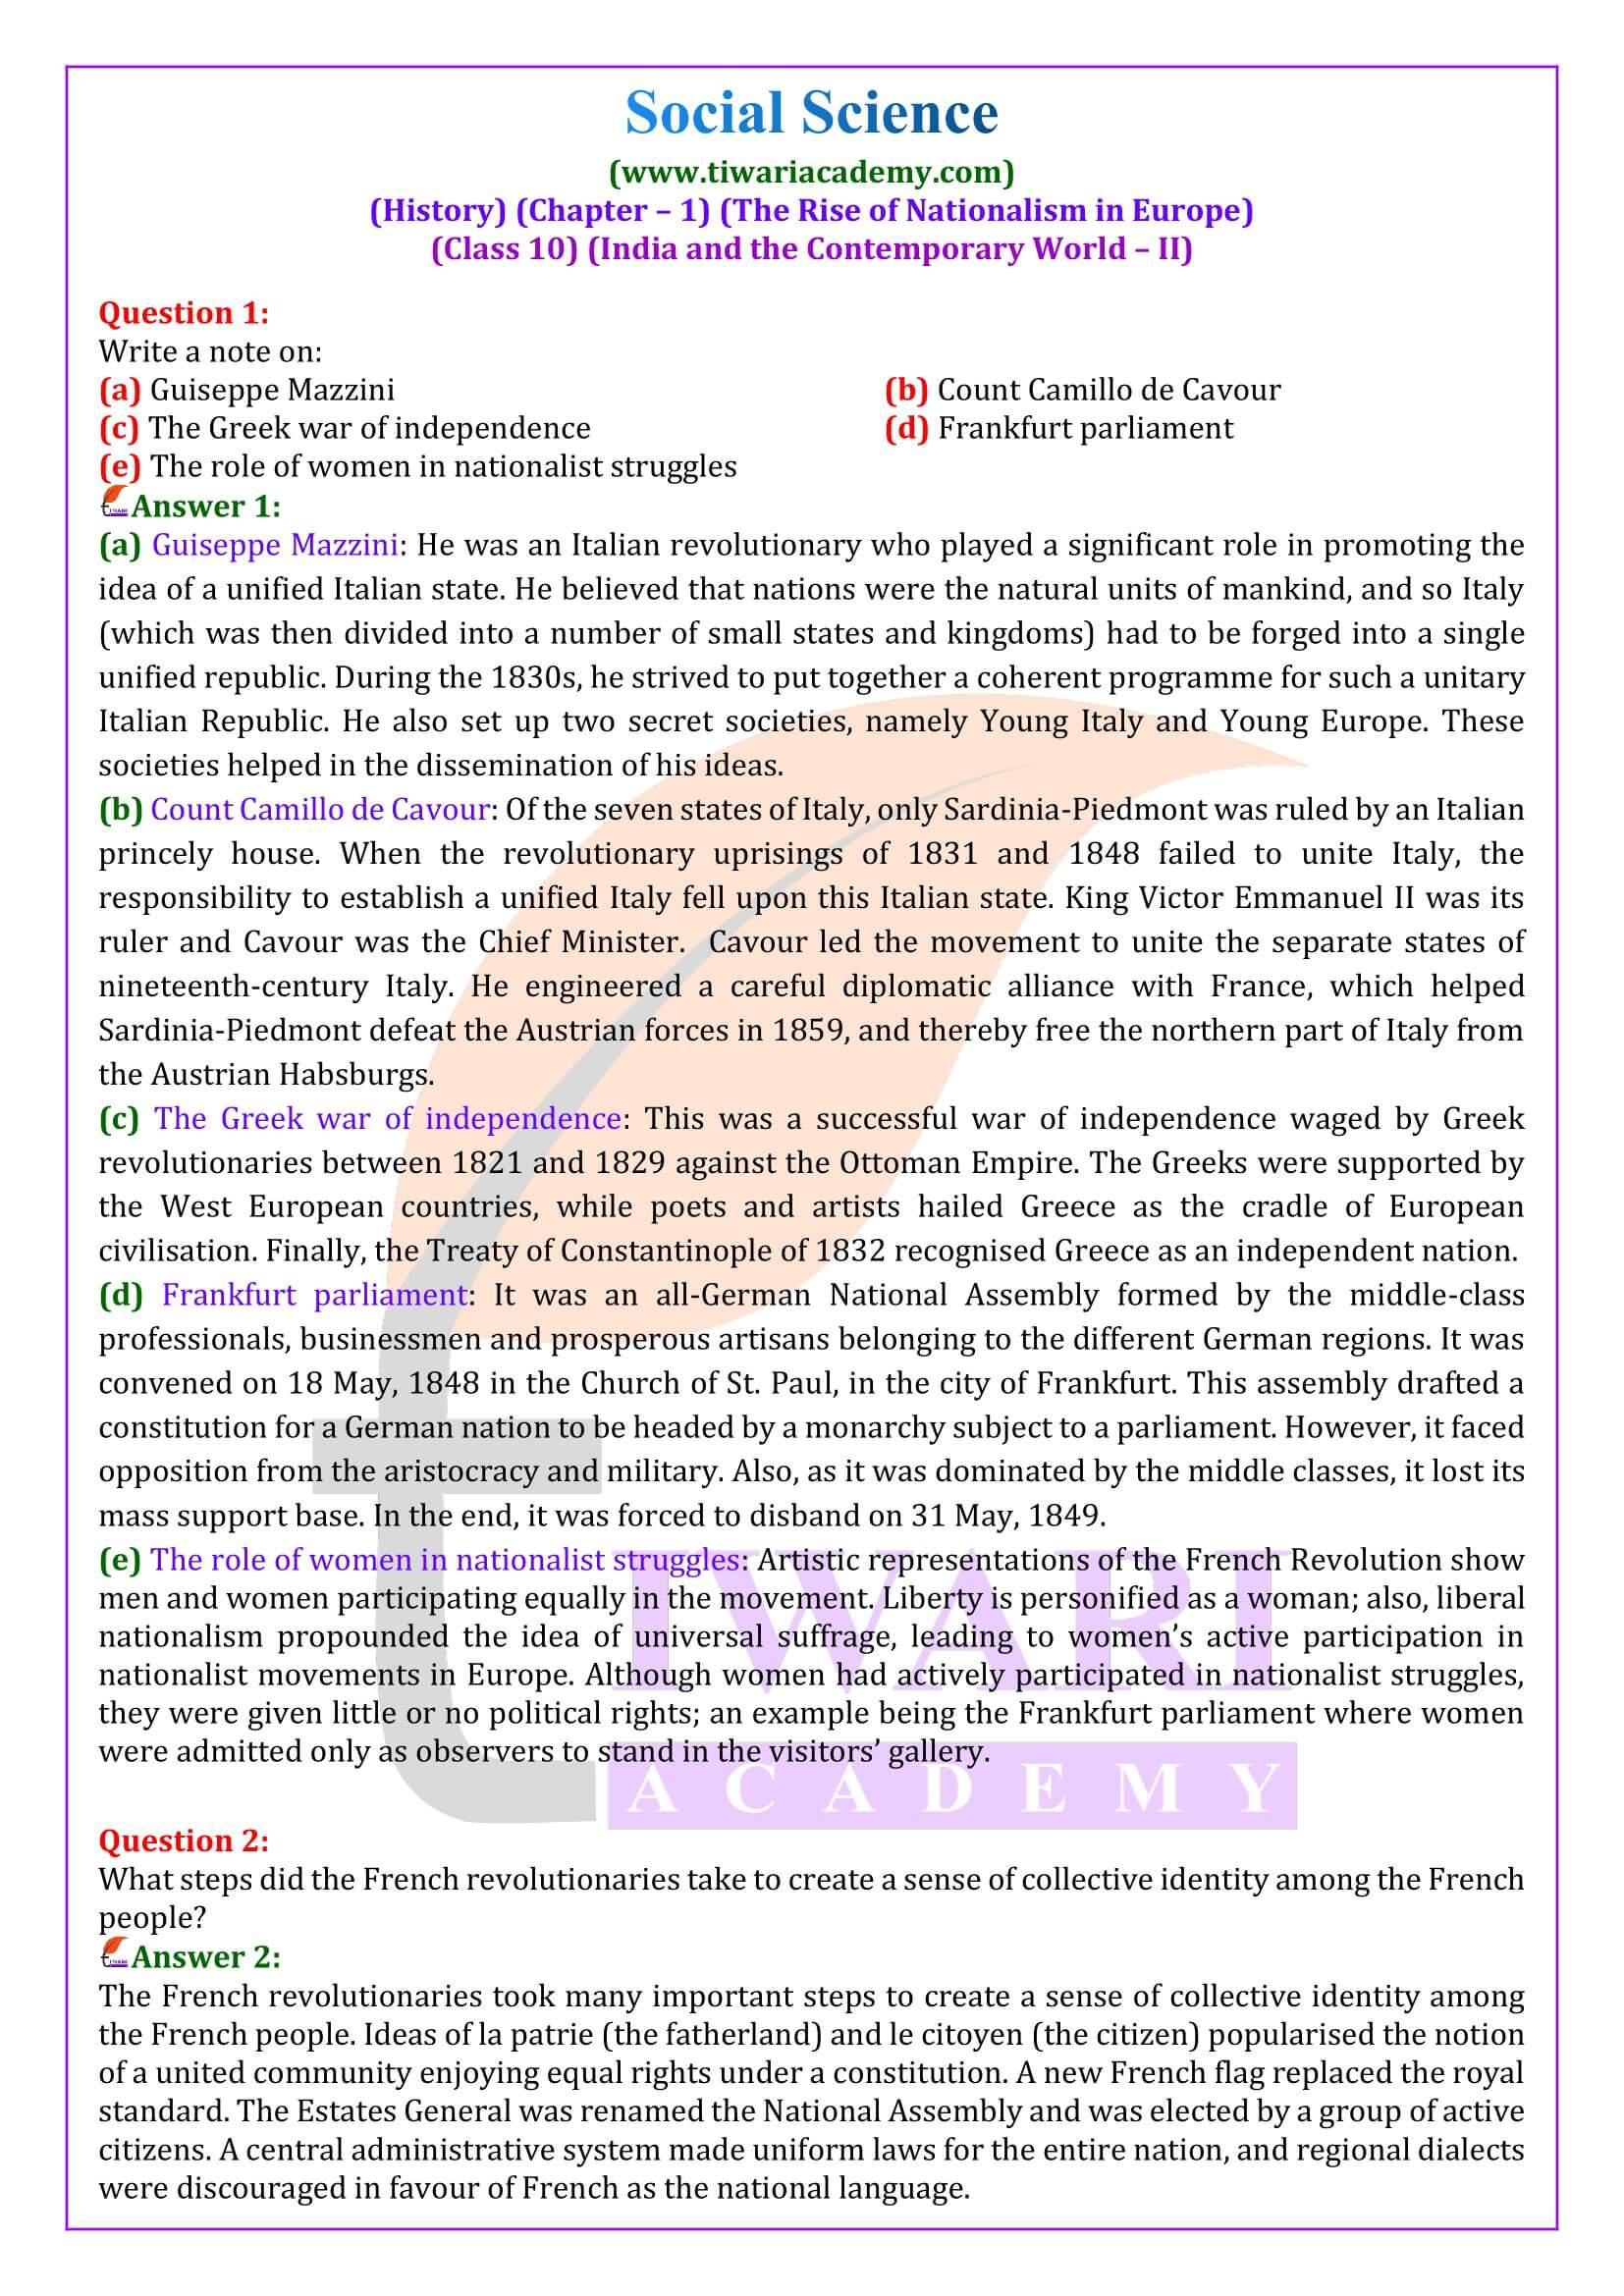 NCERT Solutions for Class 10 History Chapter 1